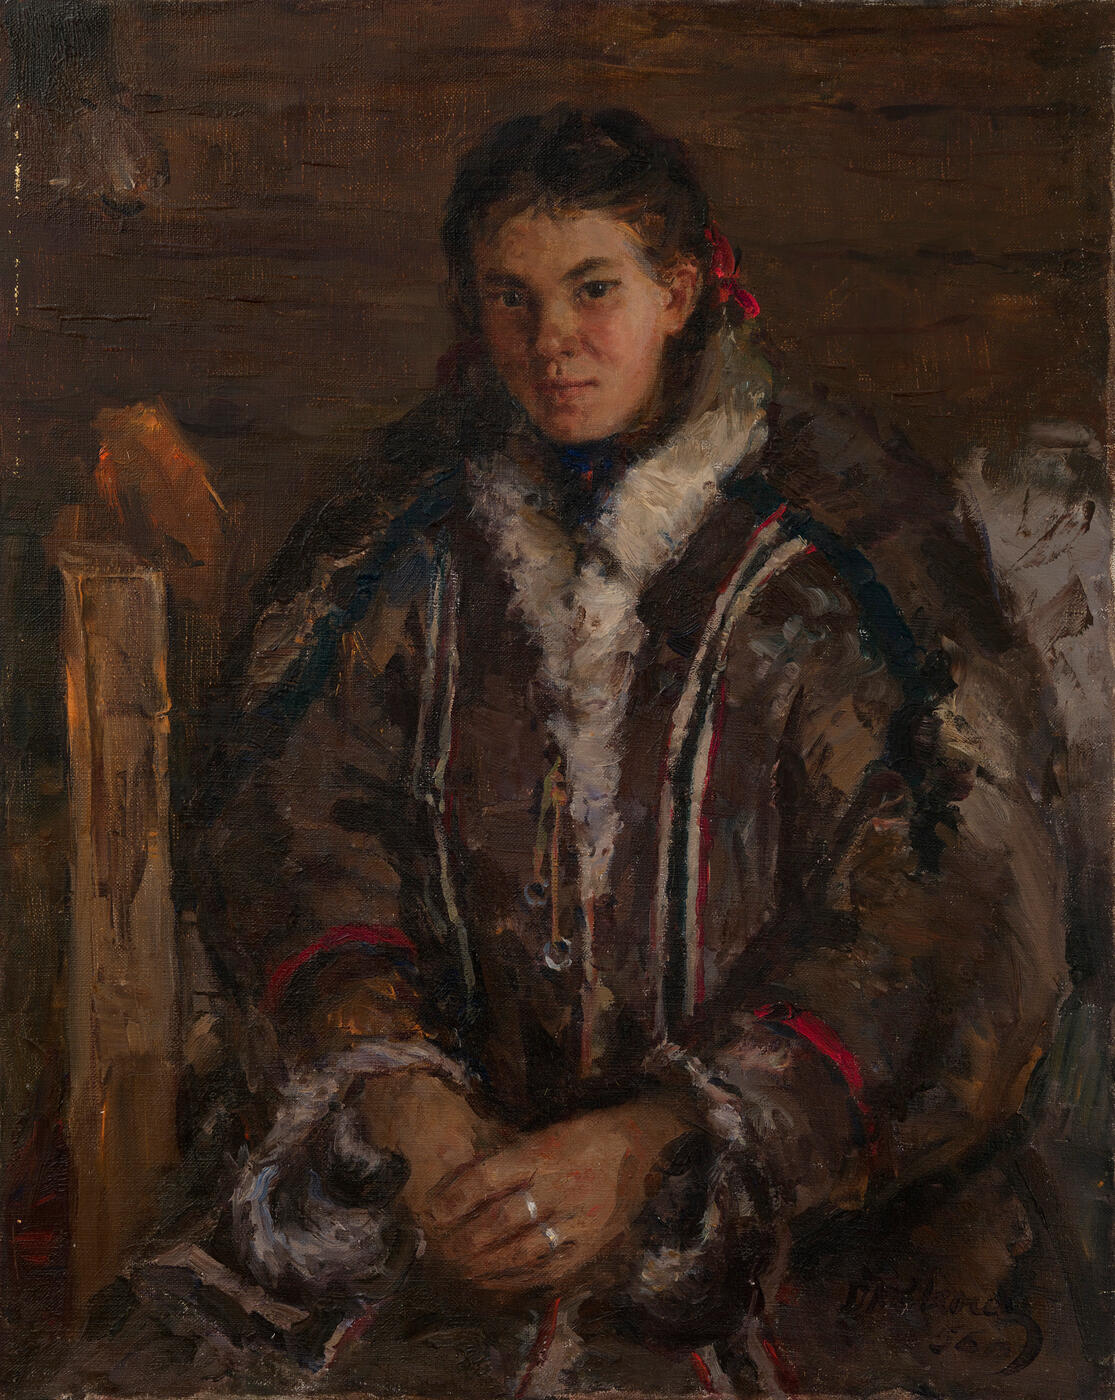 Portrait of a Zyrian Girl